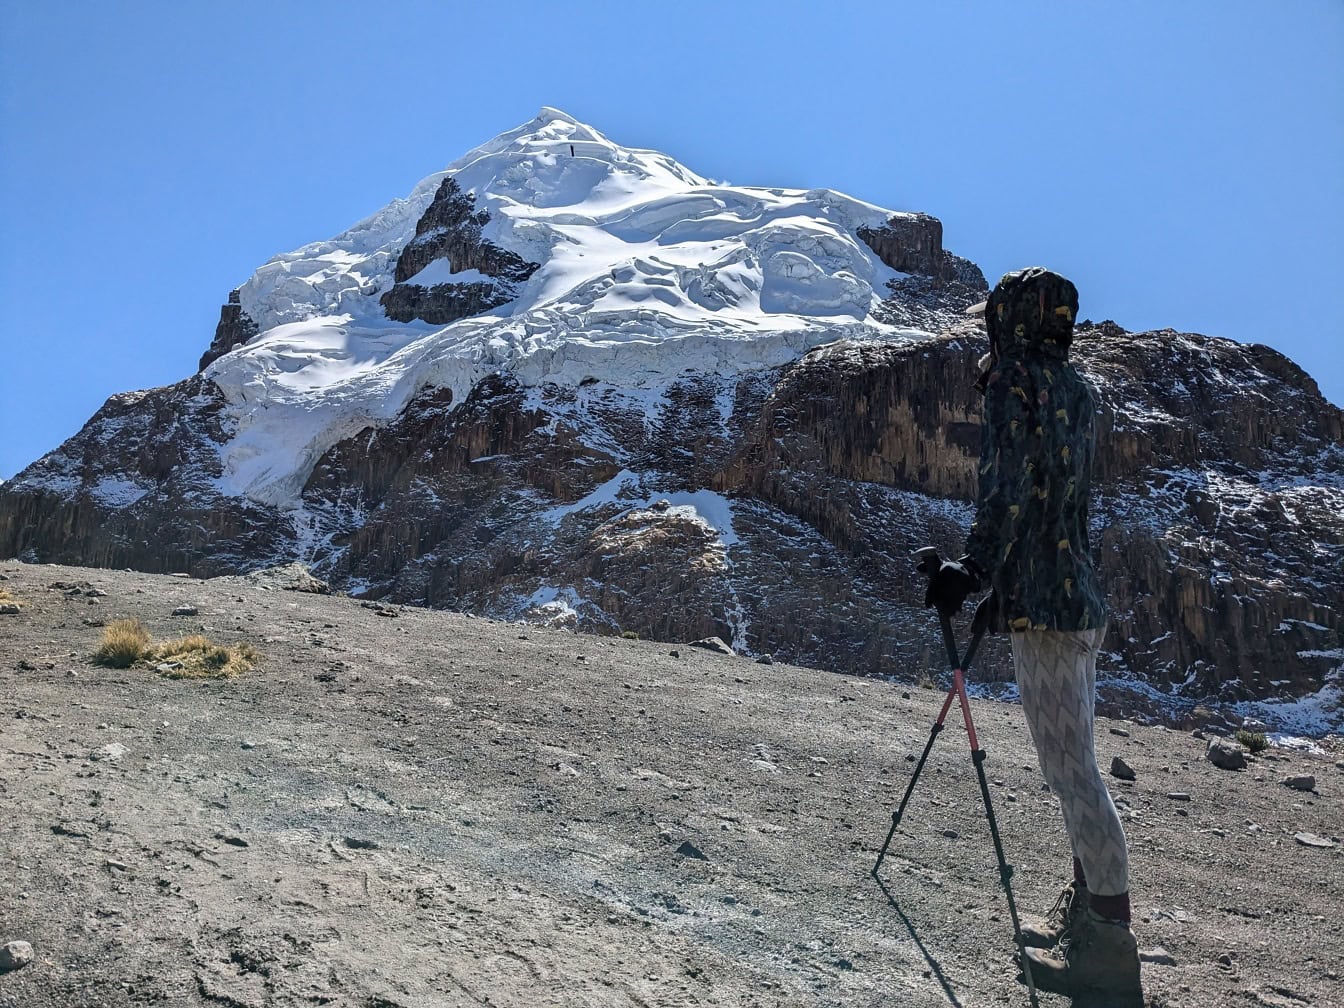 Person standing on a mountain with a snow covered mountain in the background in the Andes of Peru